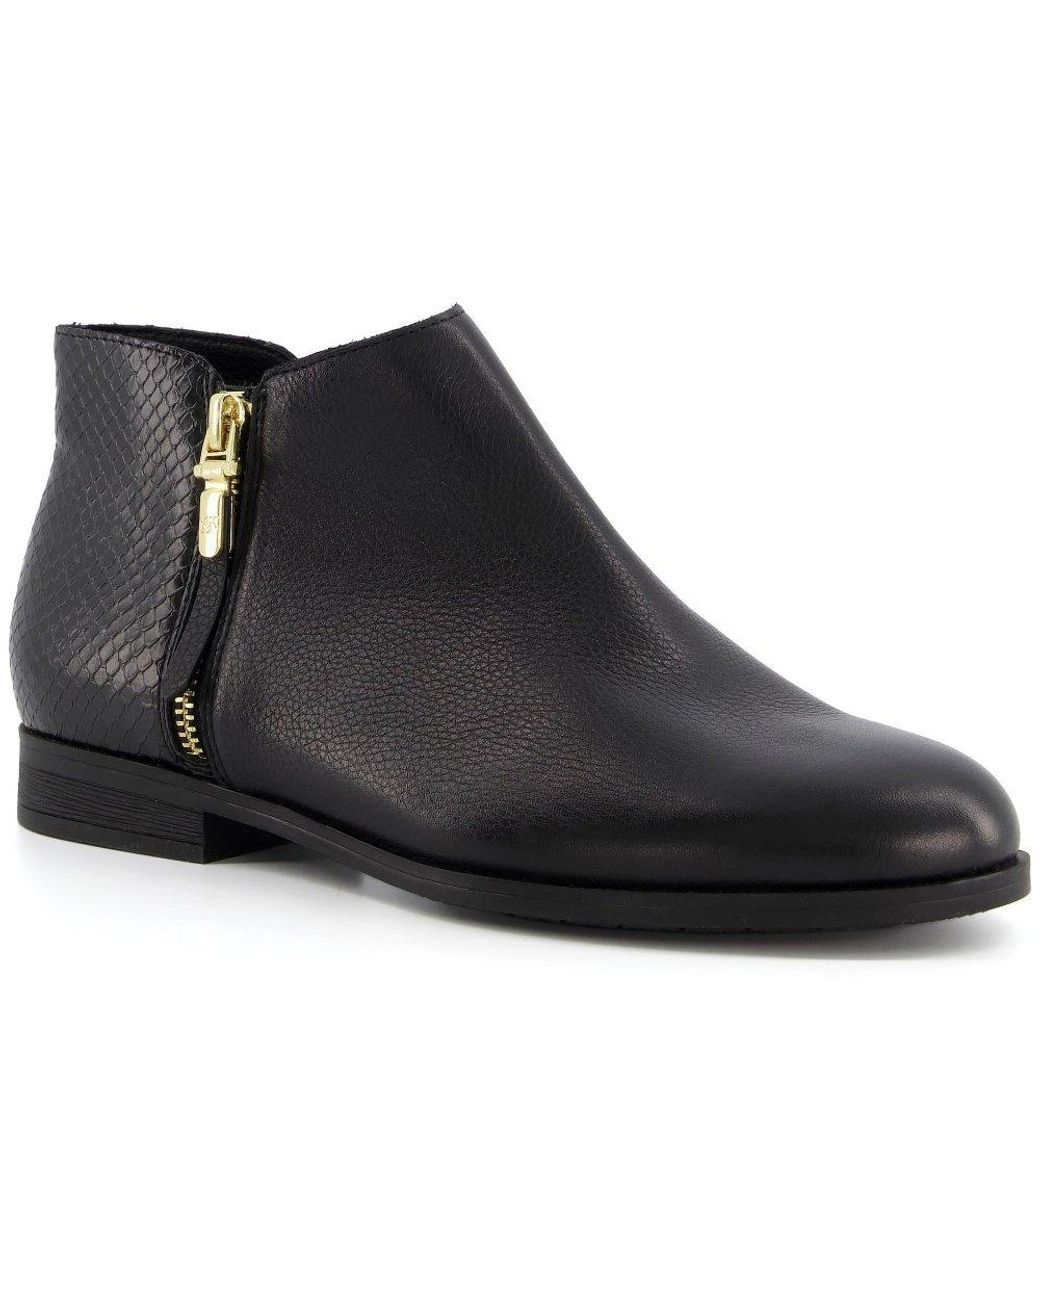 Dune Pandi Ankle Boots in Black | Lyst Canada